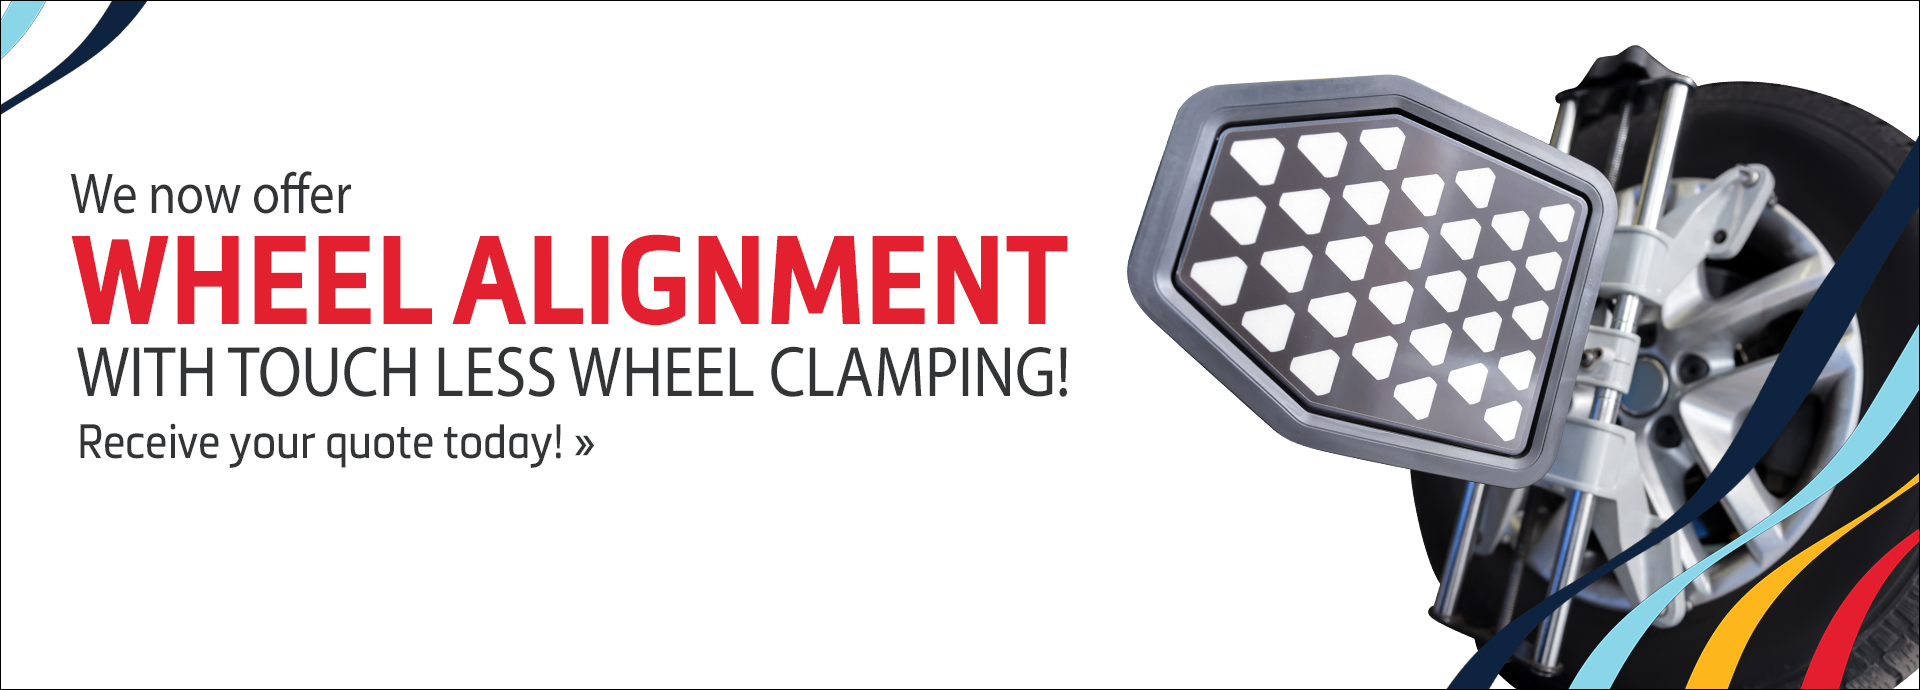 Wheel Alignment with Touchless Wheel Clamping